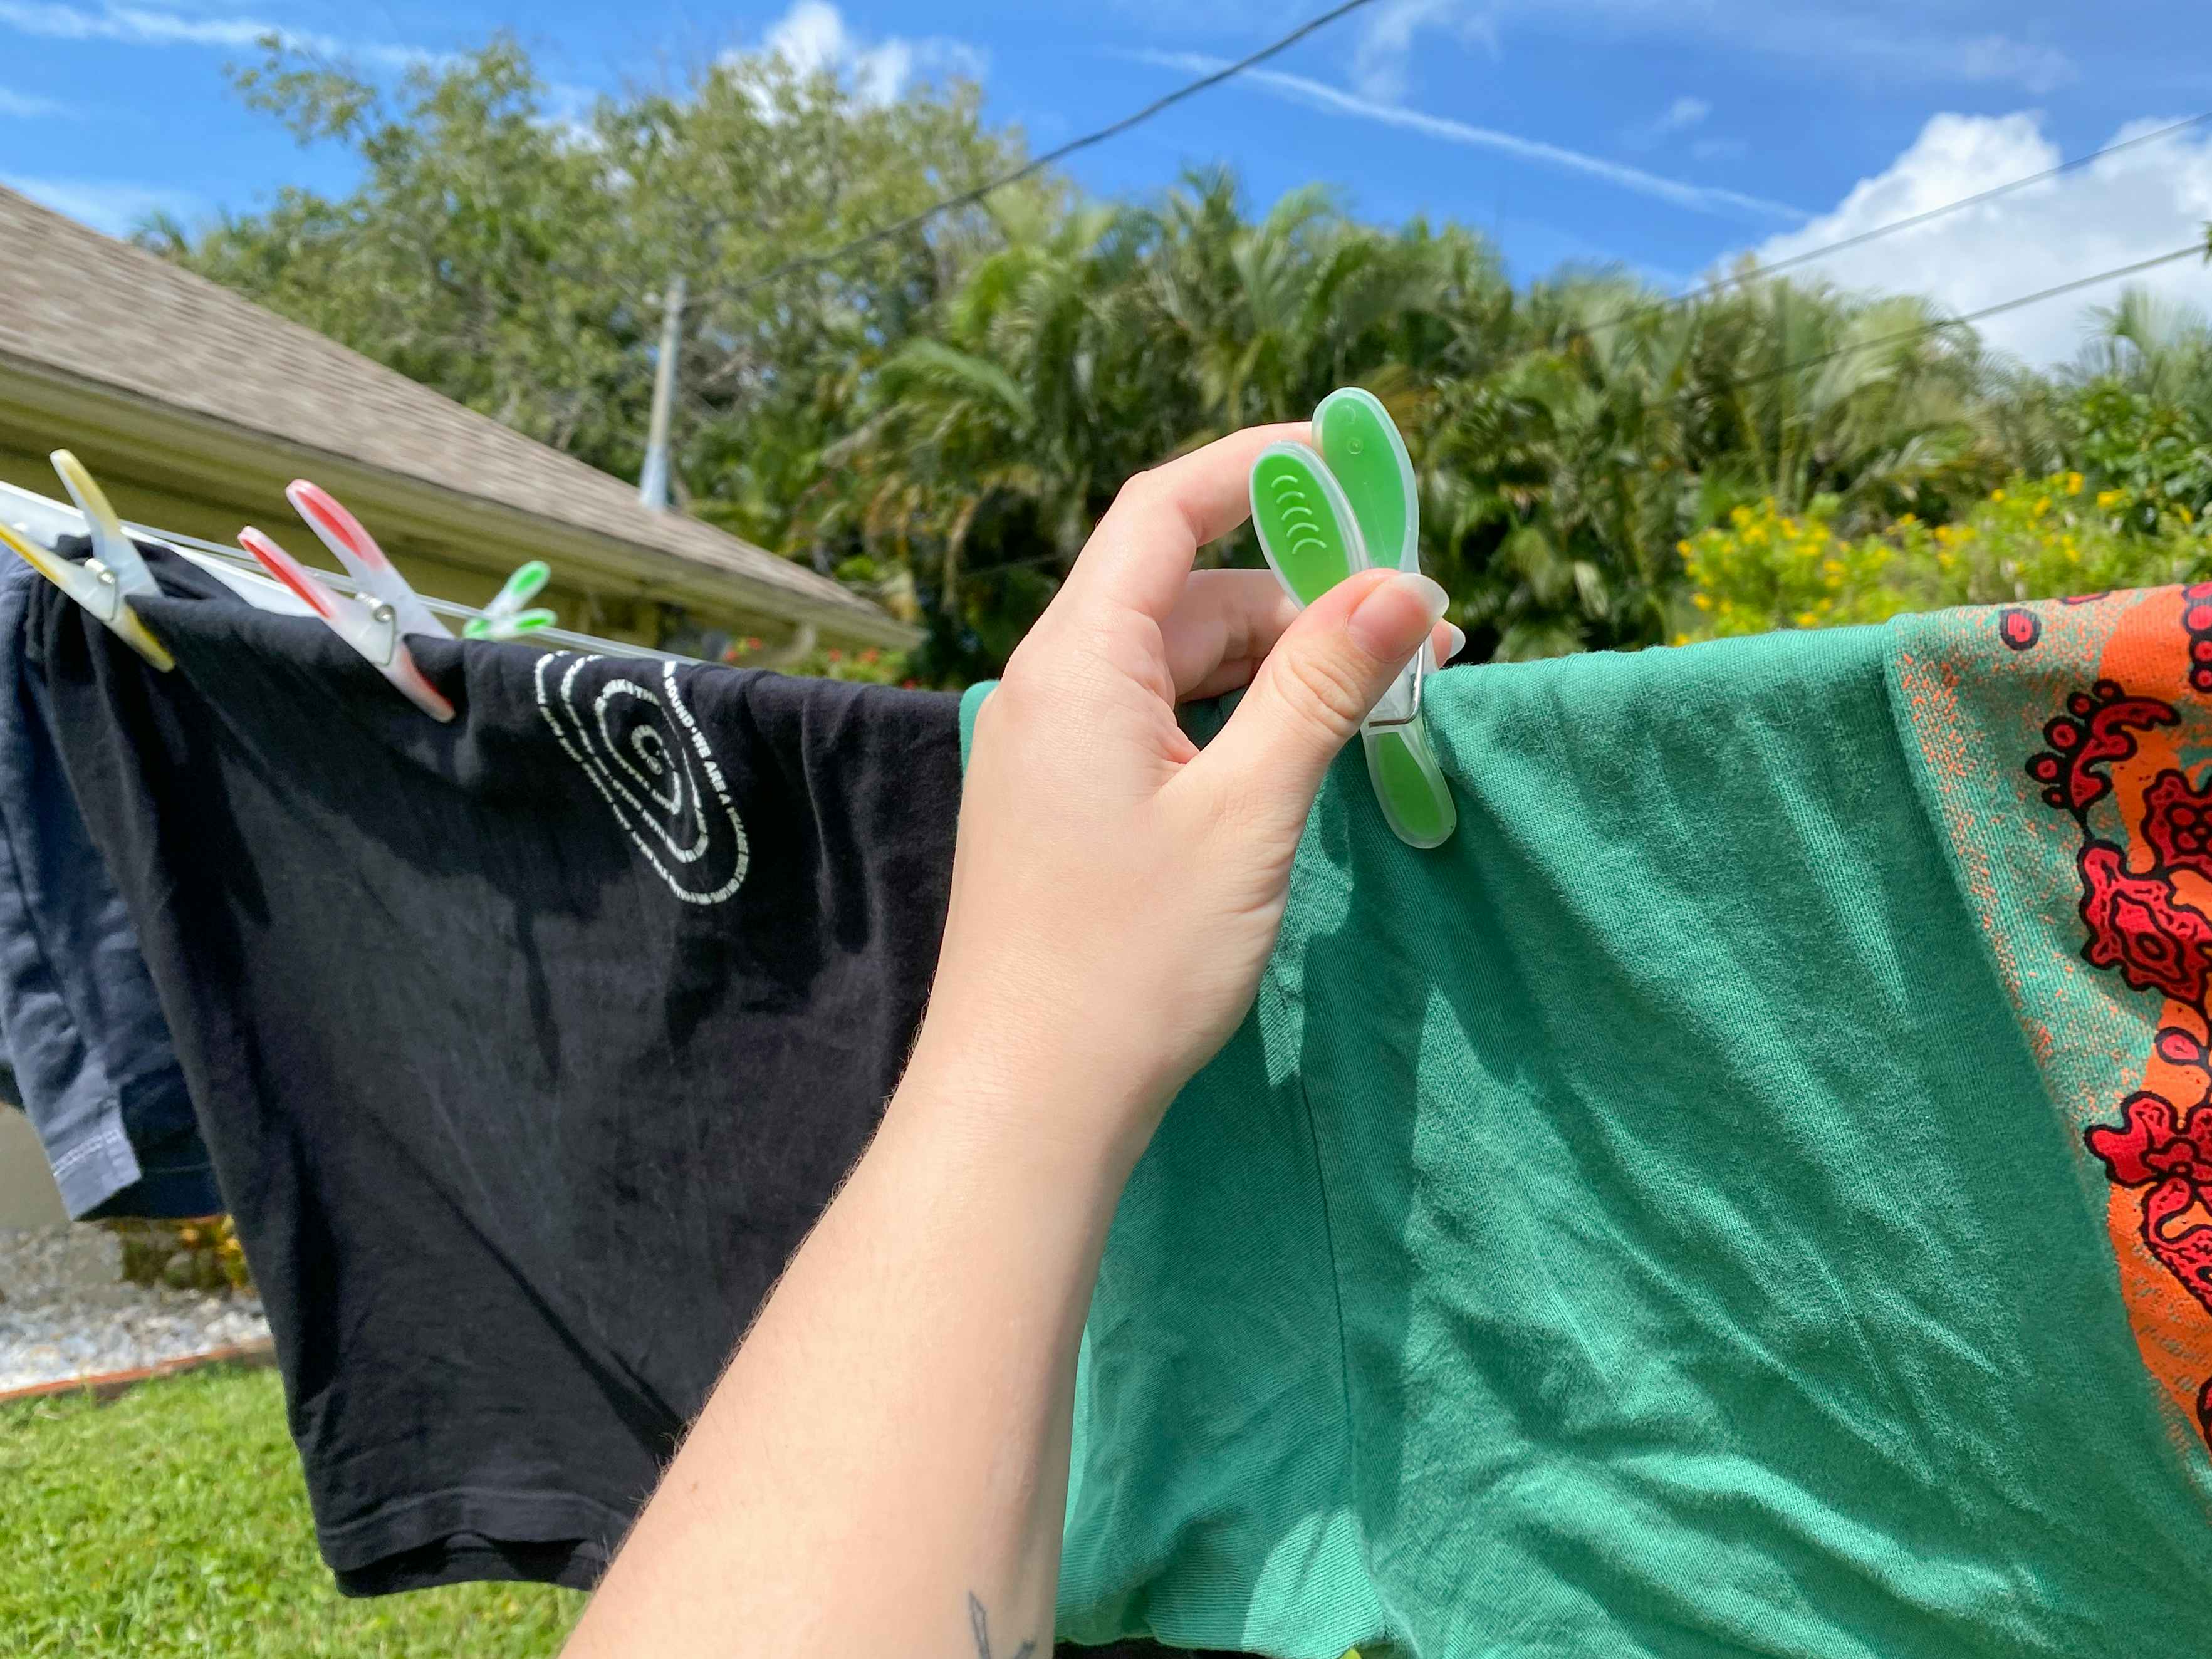 A person's hand using a colorful clothespin to hang a shirt outside to dry on a clothesline.